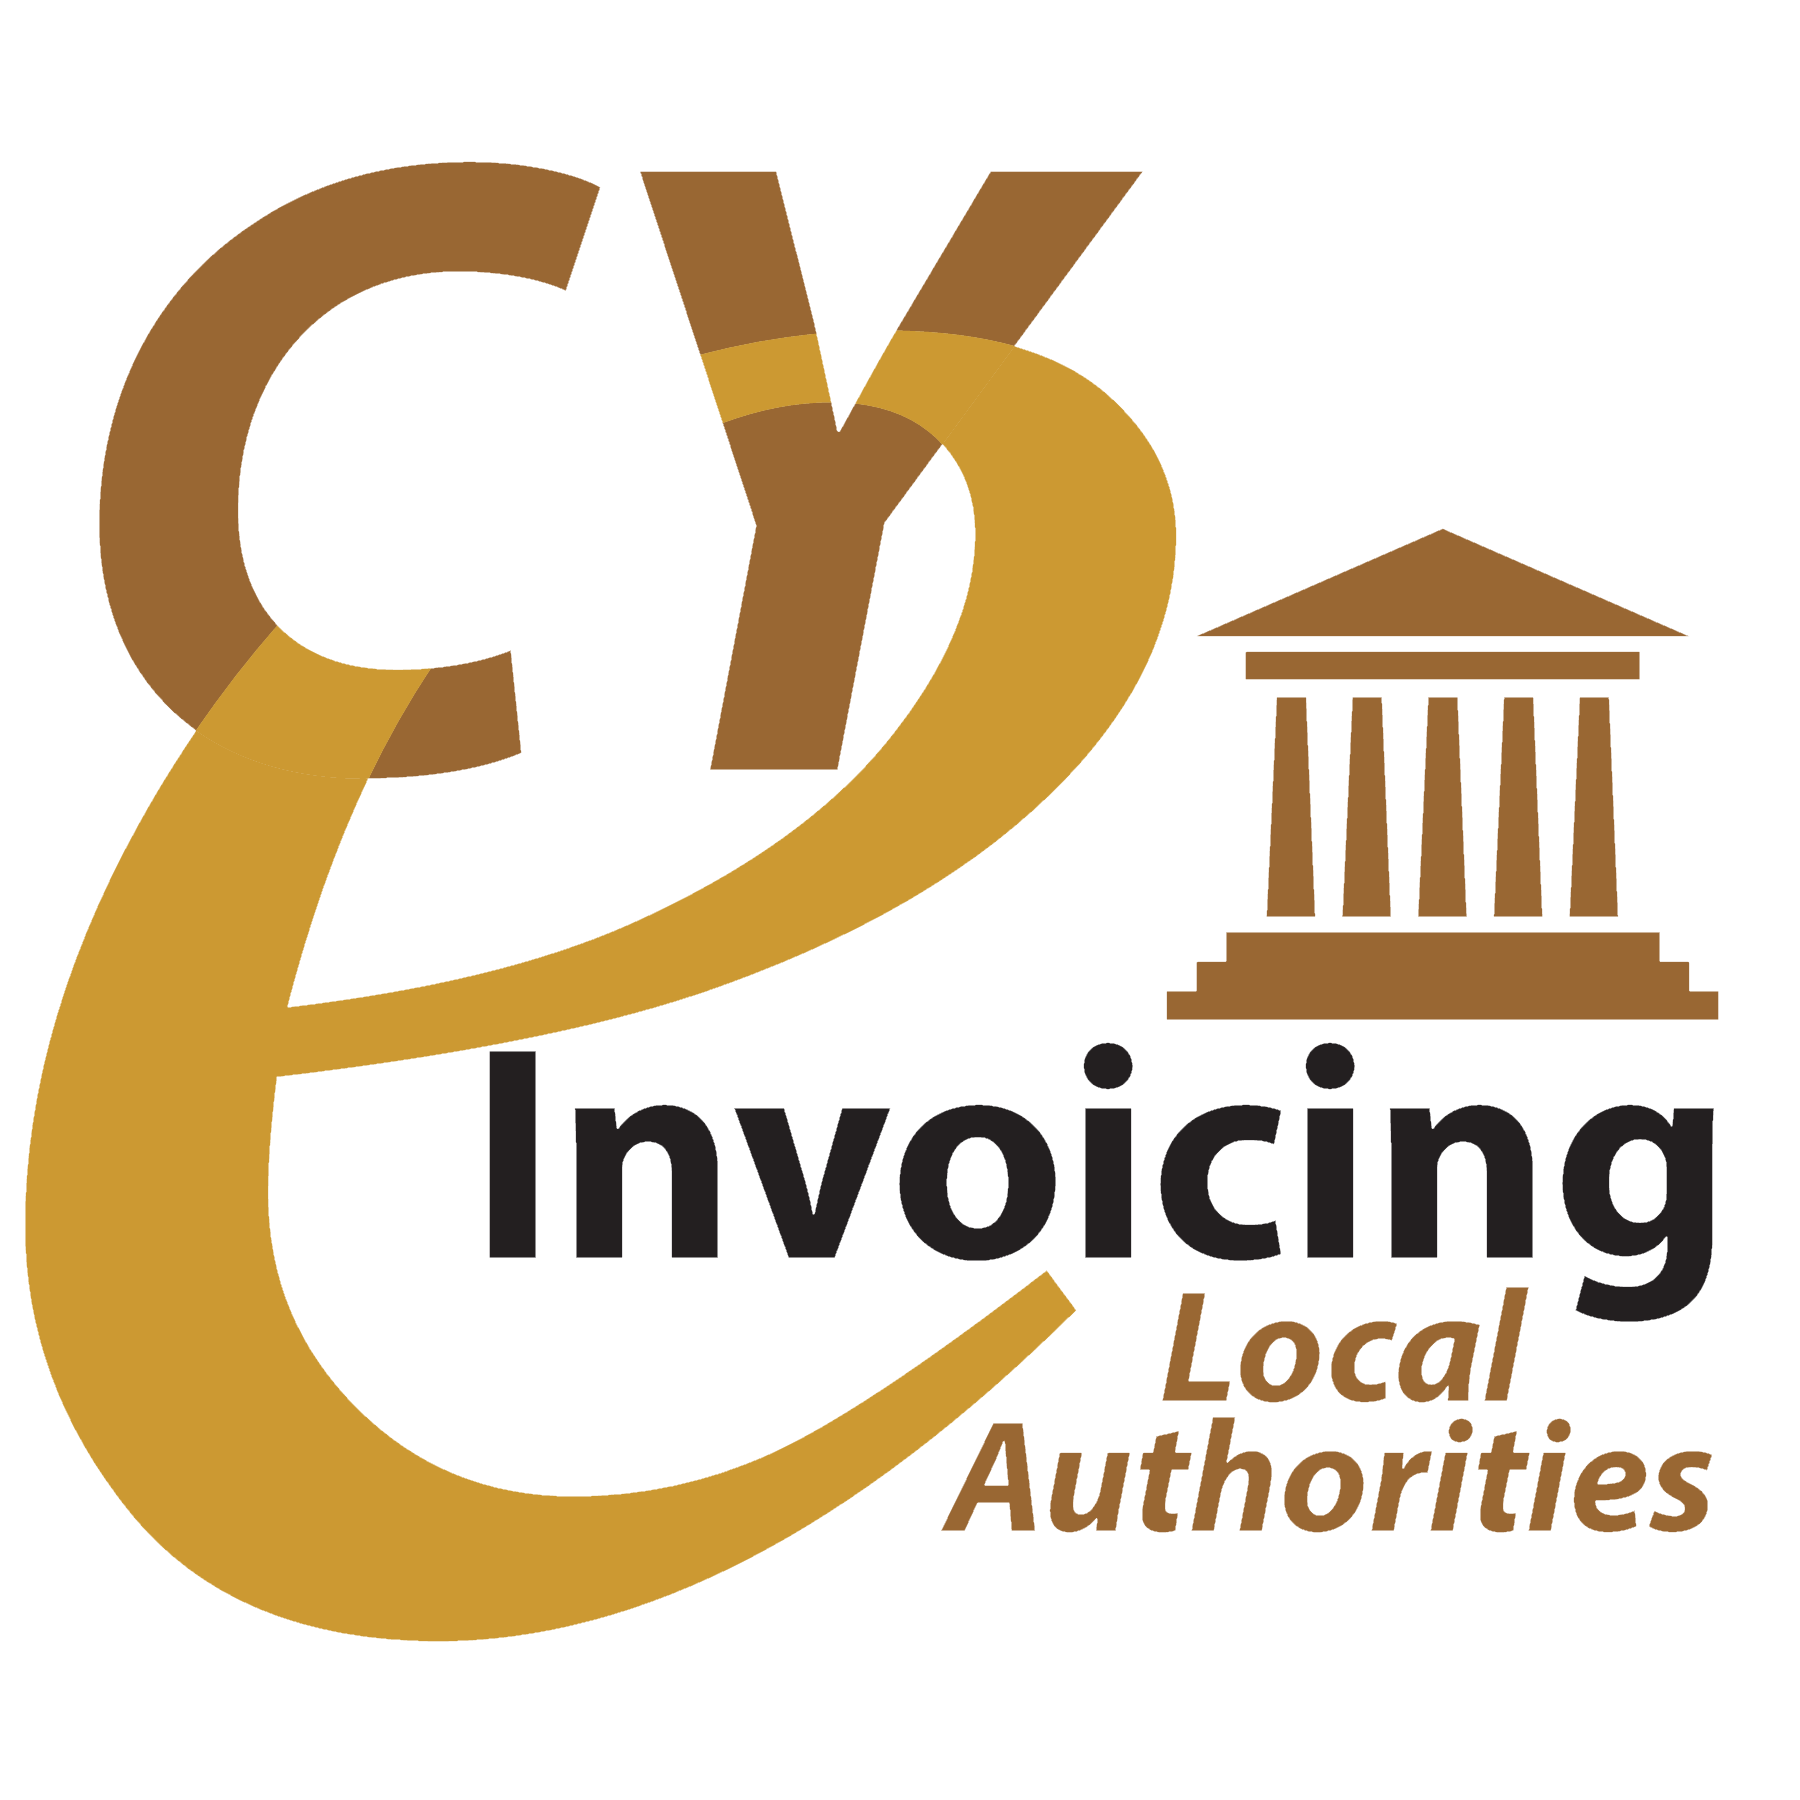 CY E-invoicing - Local Authorities